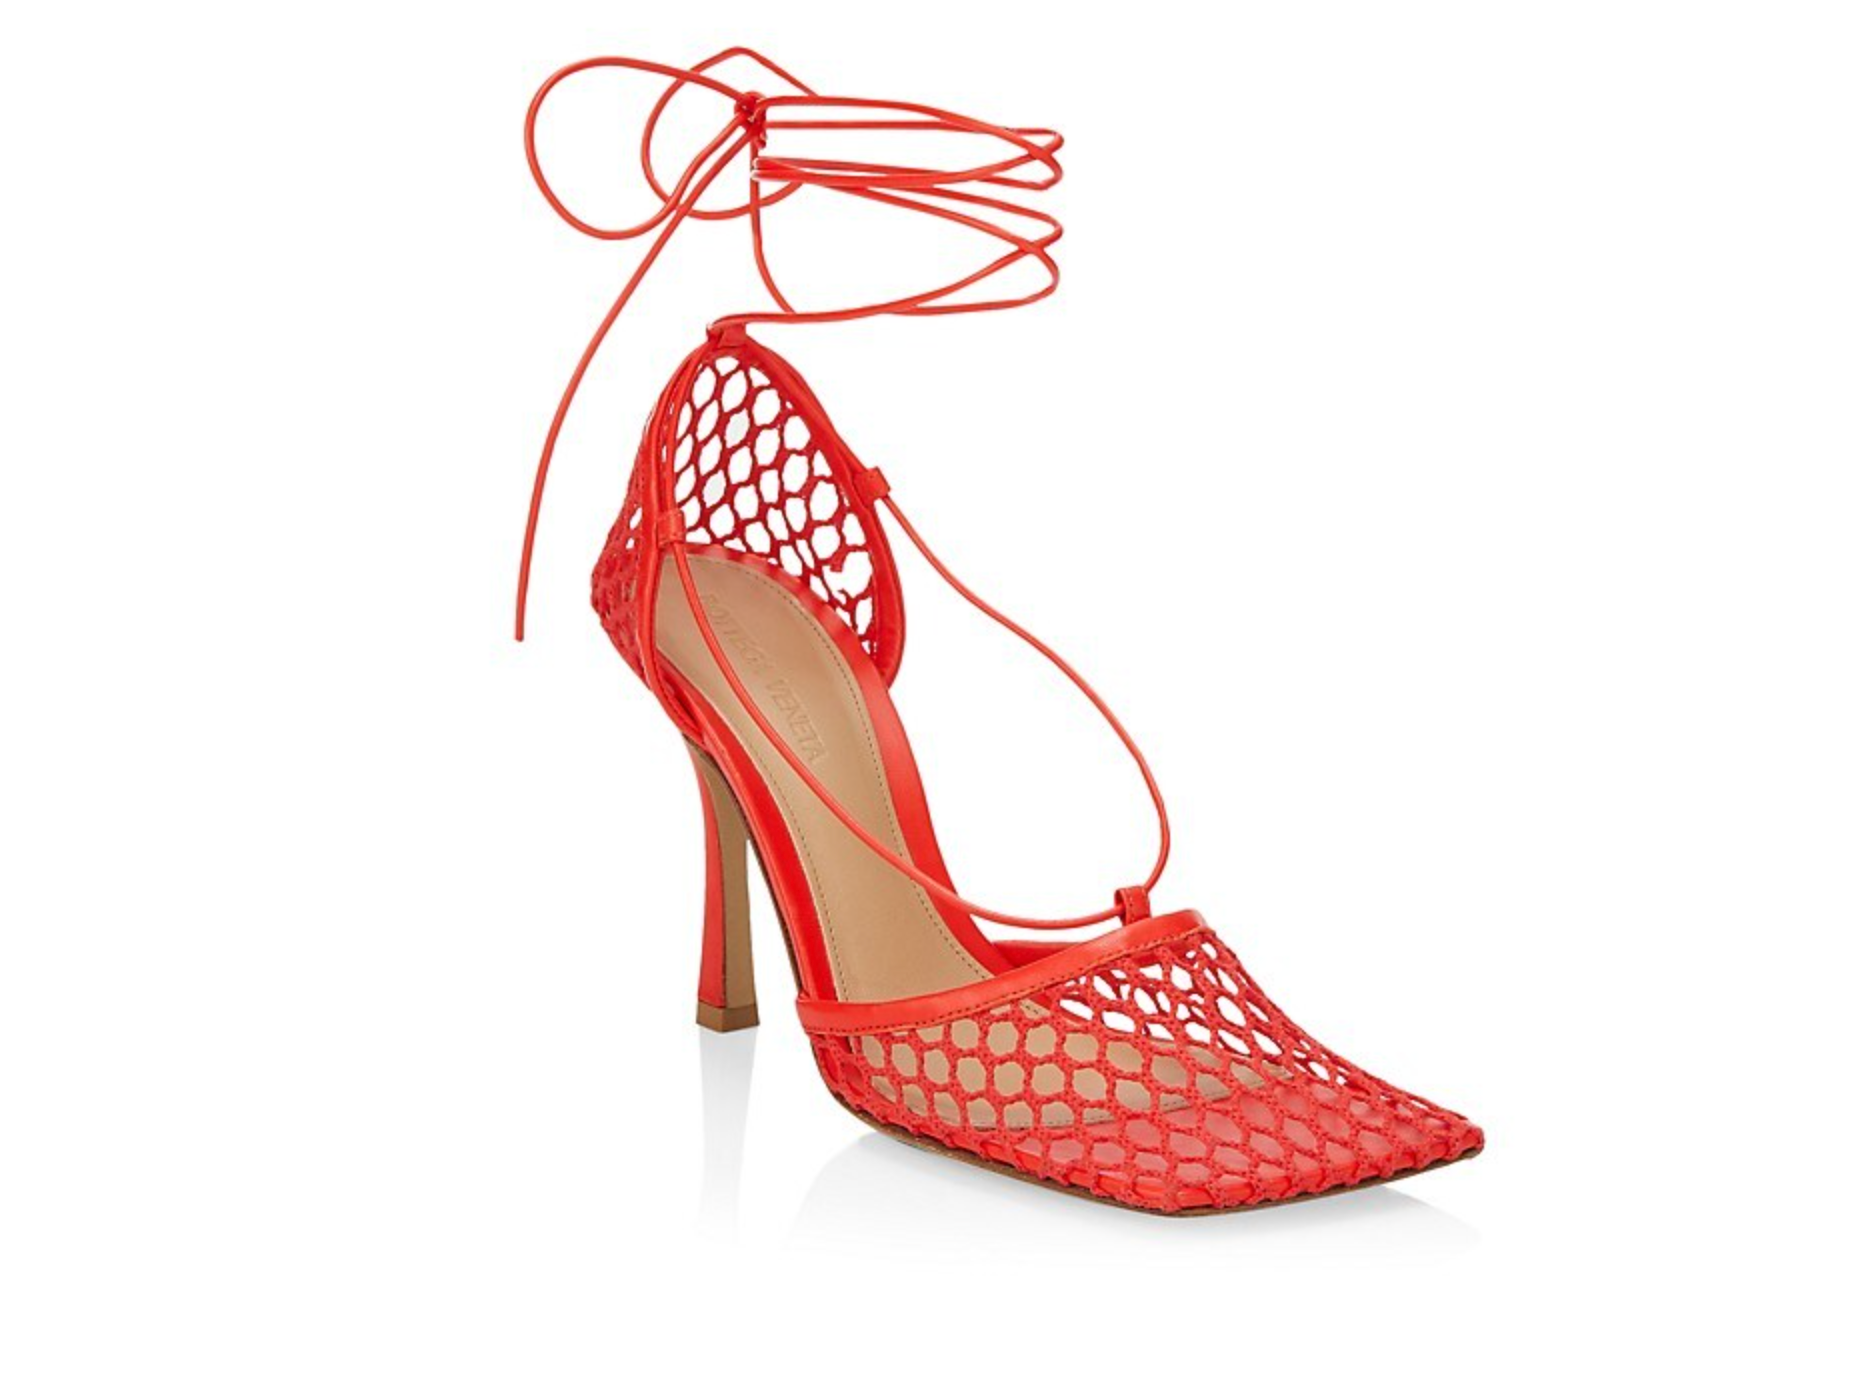 The Bottega Veneta Stretch Mesh-Panel Sandals Are Already Poised To Be The Shoe Of The Summer